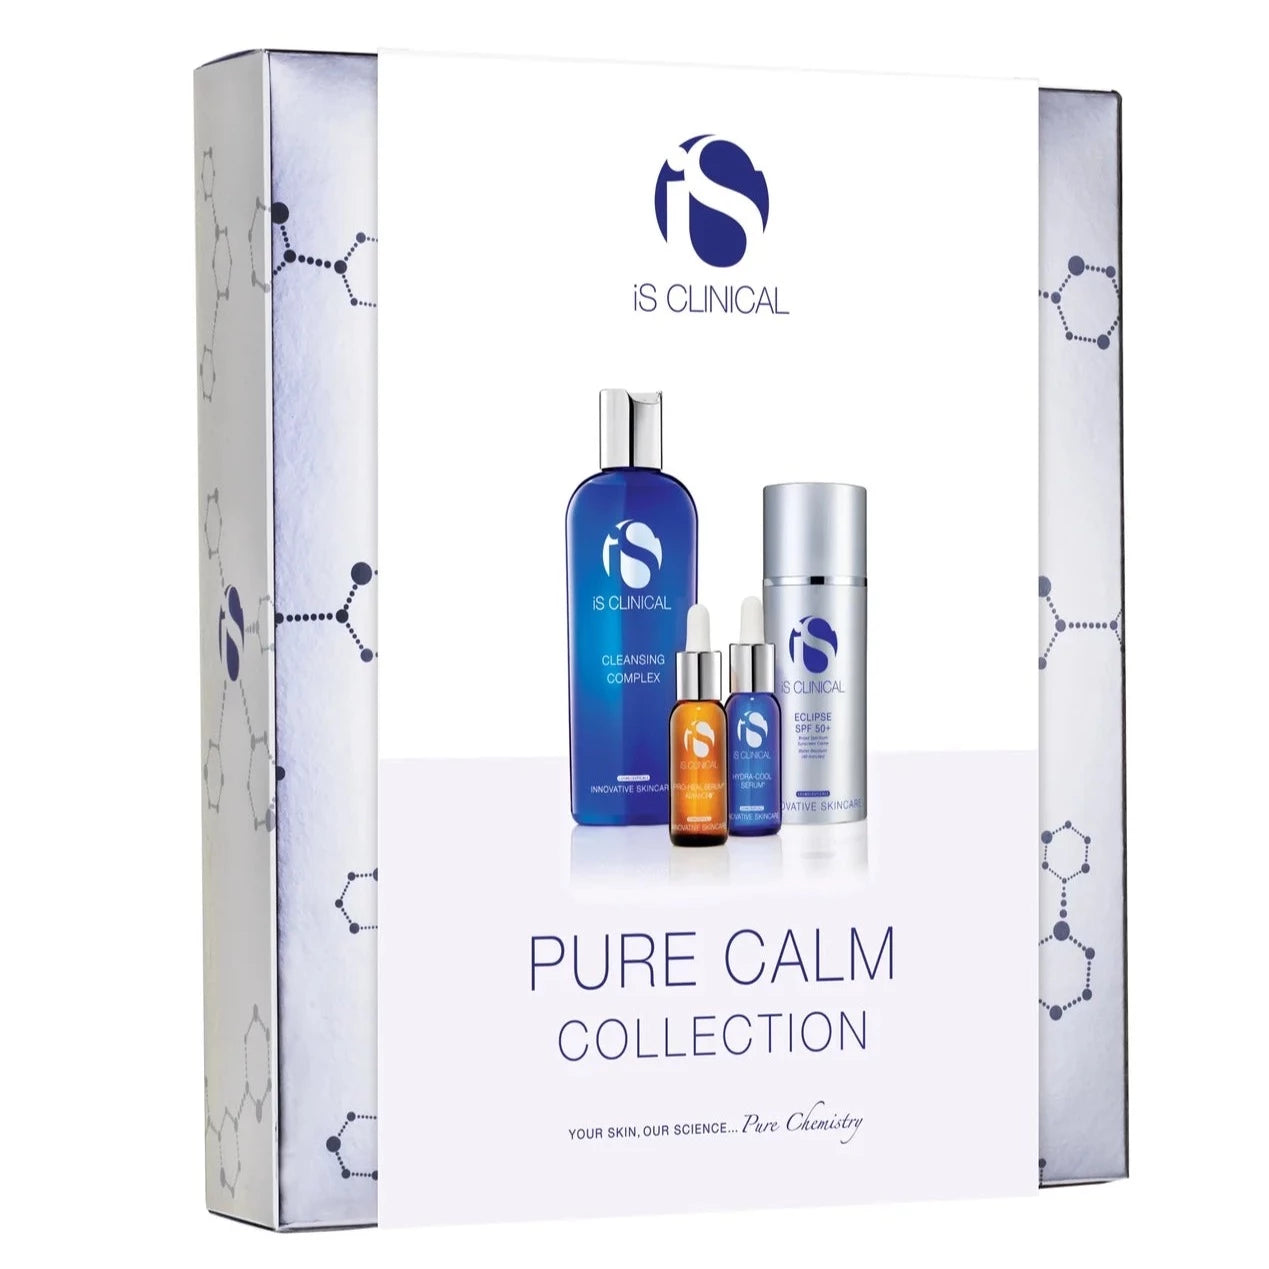 iS Clinical Pure Calm Collection is packed with calming botanical ingredients, super antioxidants, and powerful hydration, the iS Clinical Pure Calm Collection gently soothes the look of flushed or compromised skin for a healthier, more youthful-looking complexion.